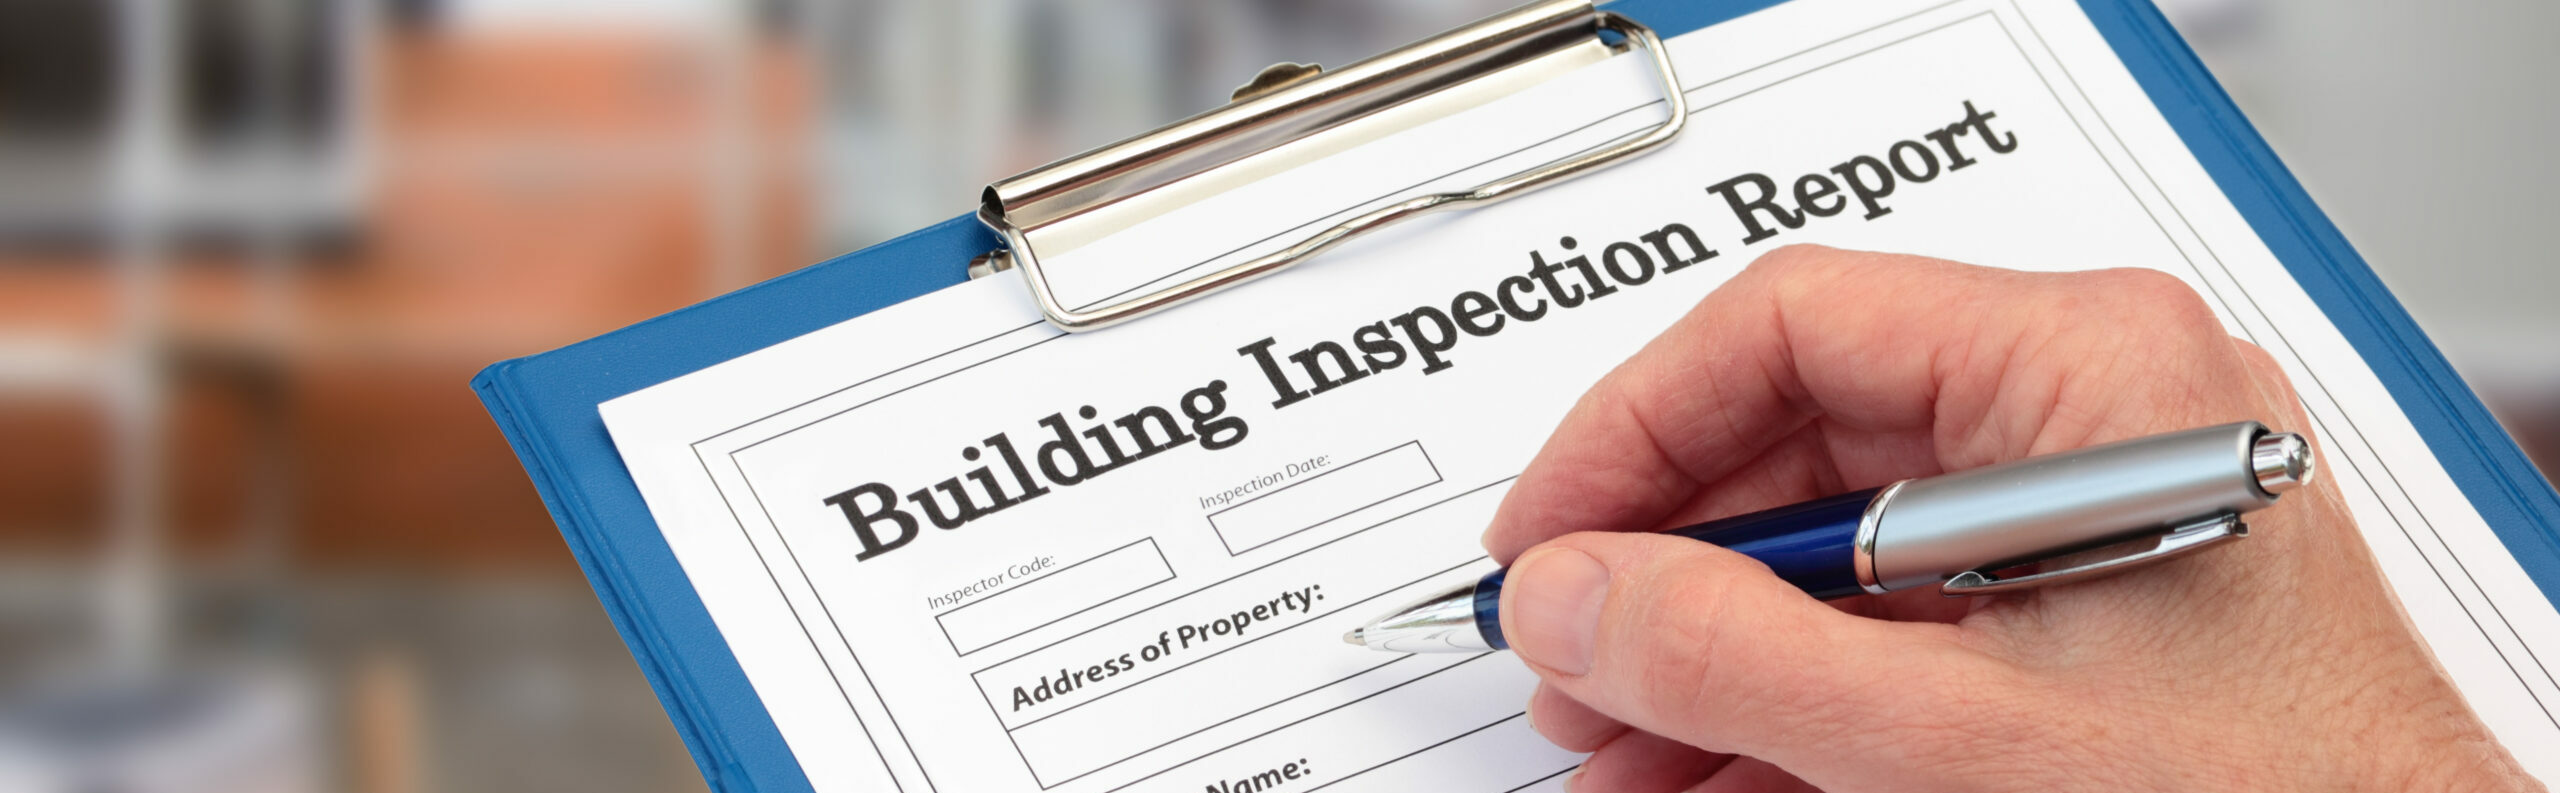 What's Included in a Typical Home Inspection? [Infographic]